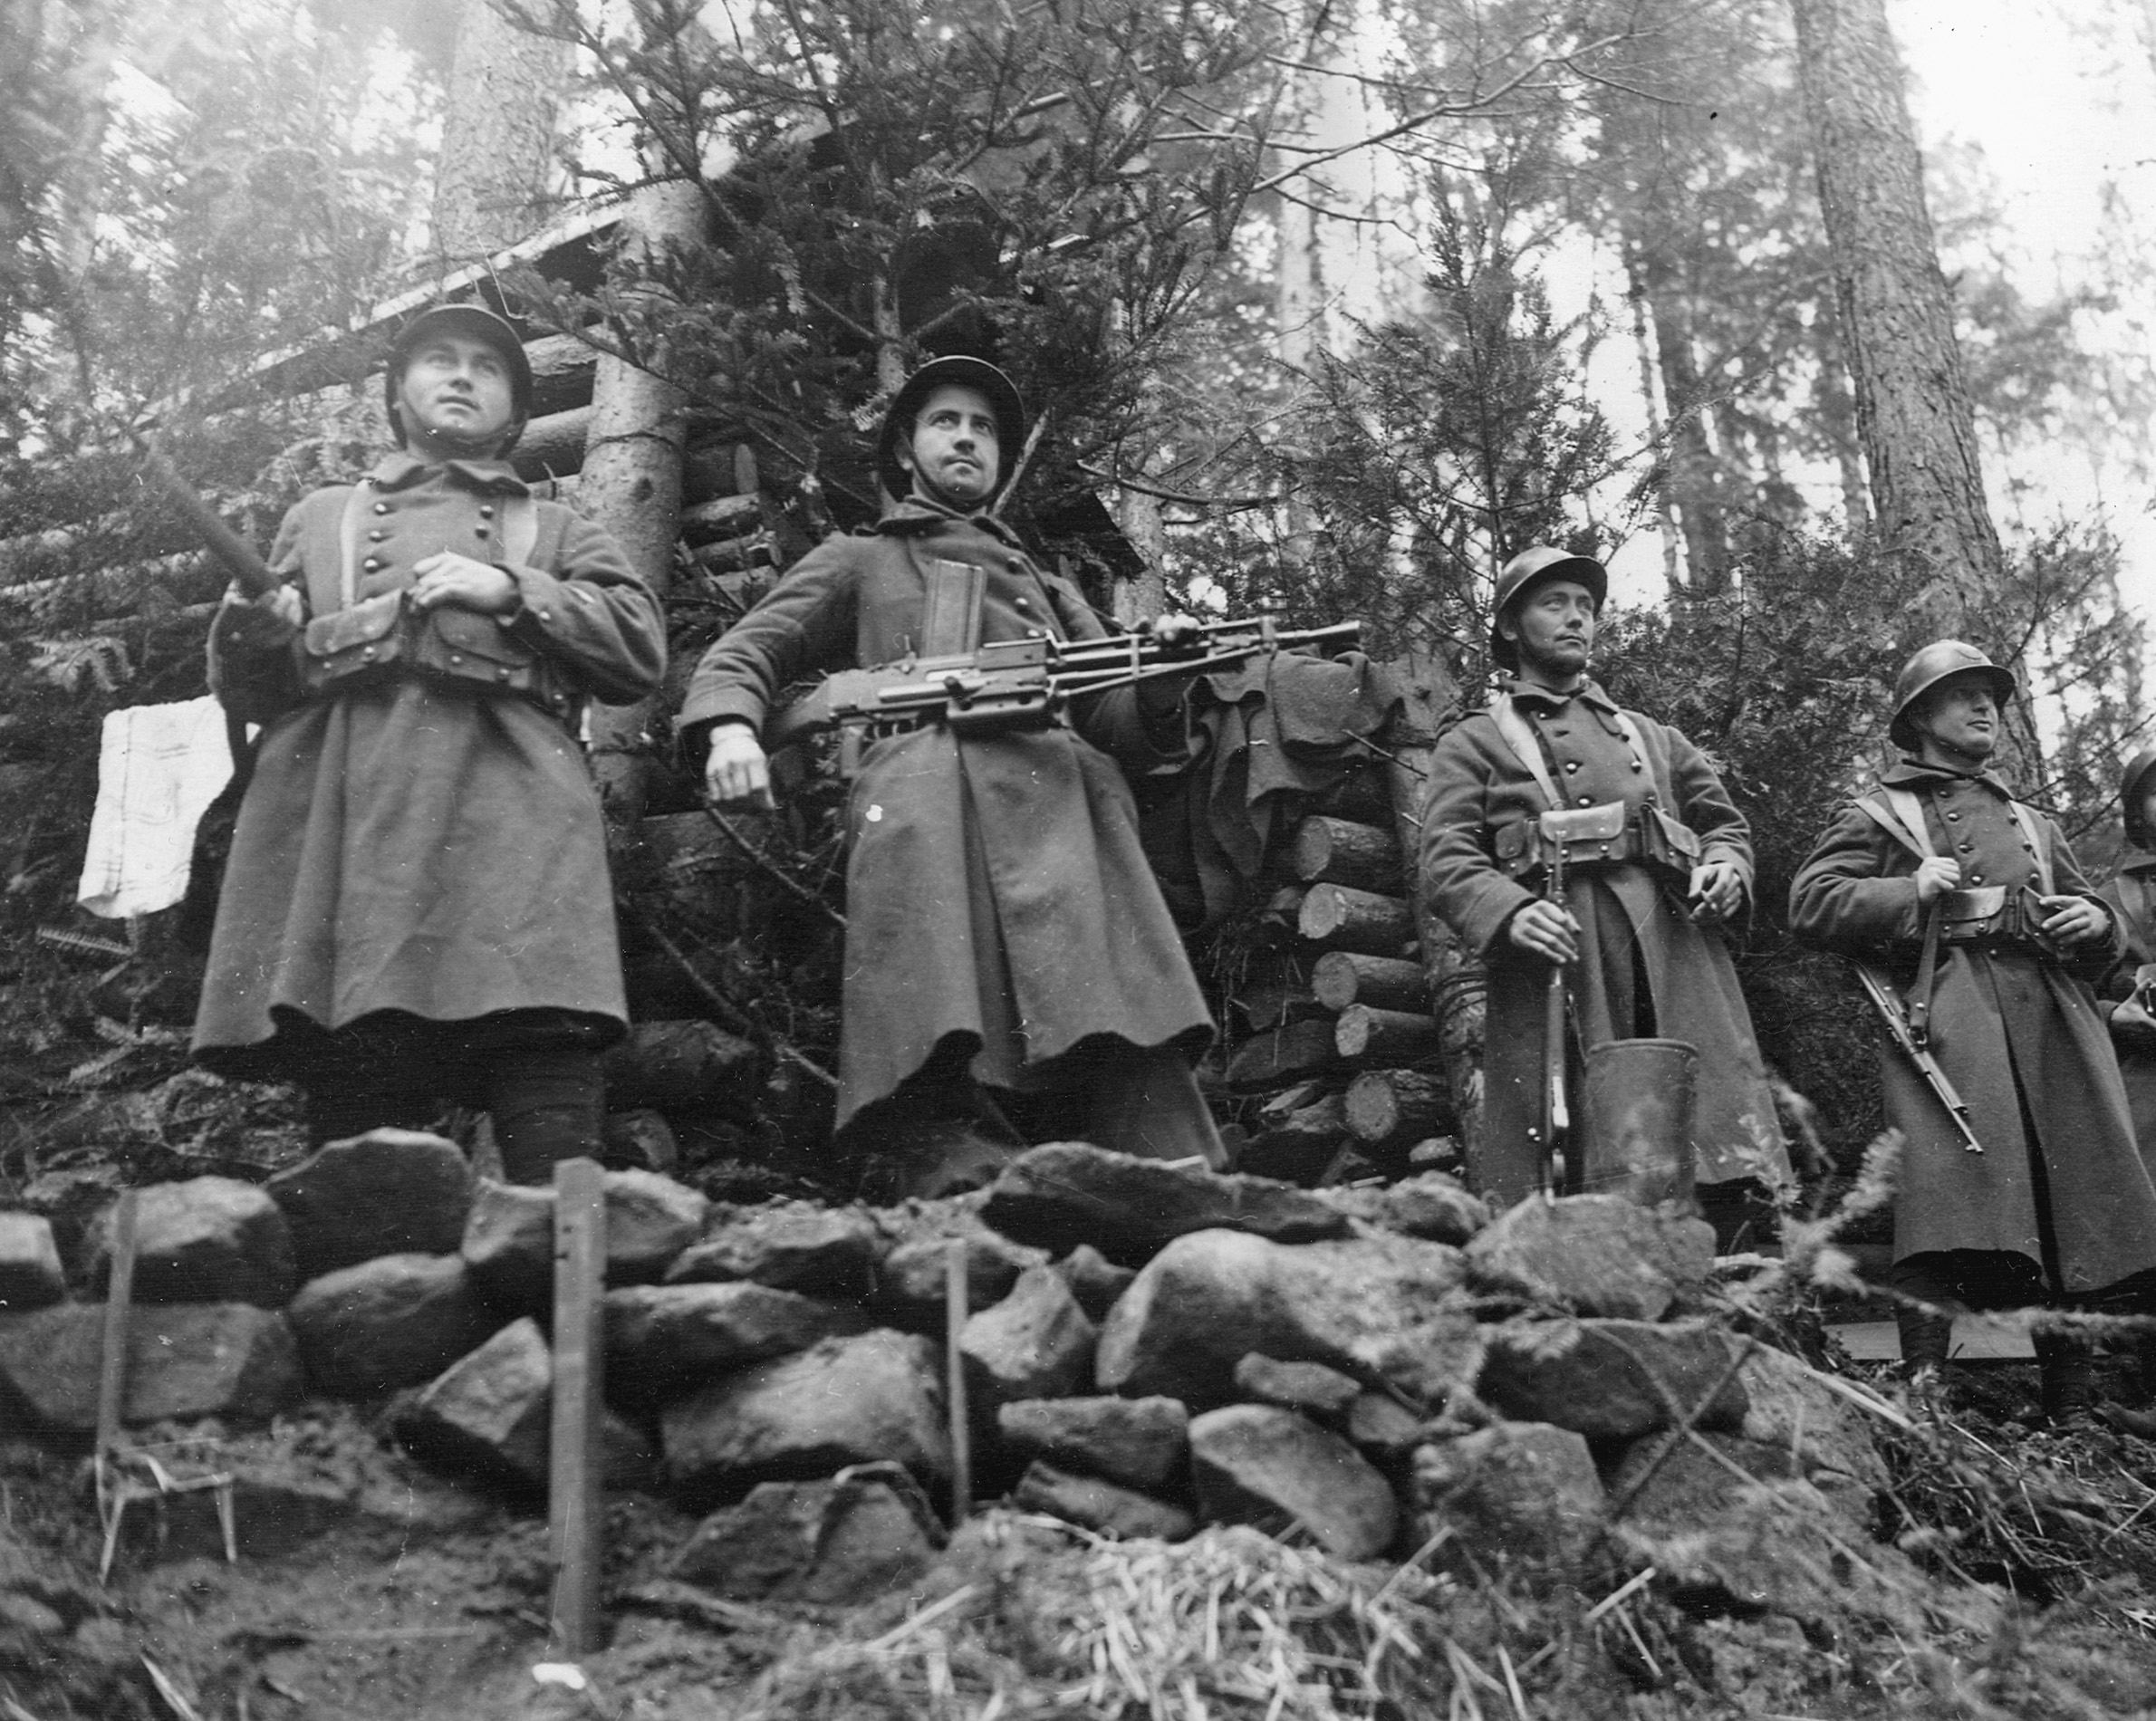 Rifles in hand, a French patrol proudly poses for the camera in front of a log blockhouse fortification atop a rocky outcrop in Belgium.